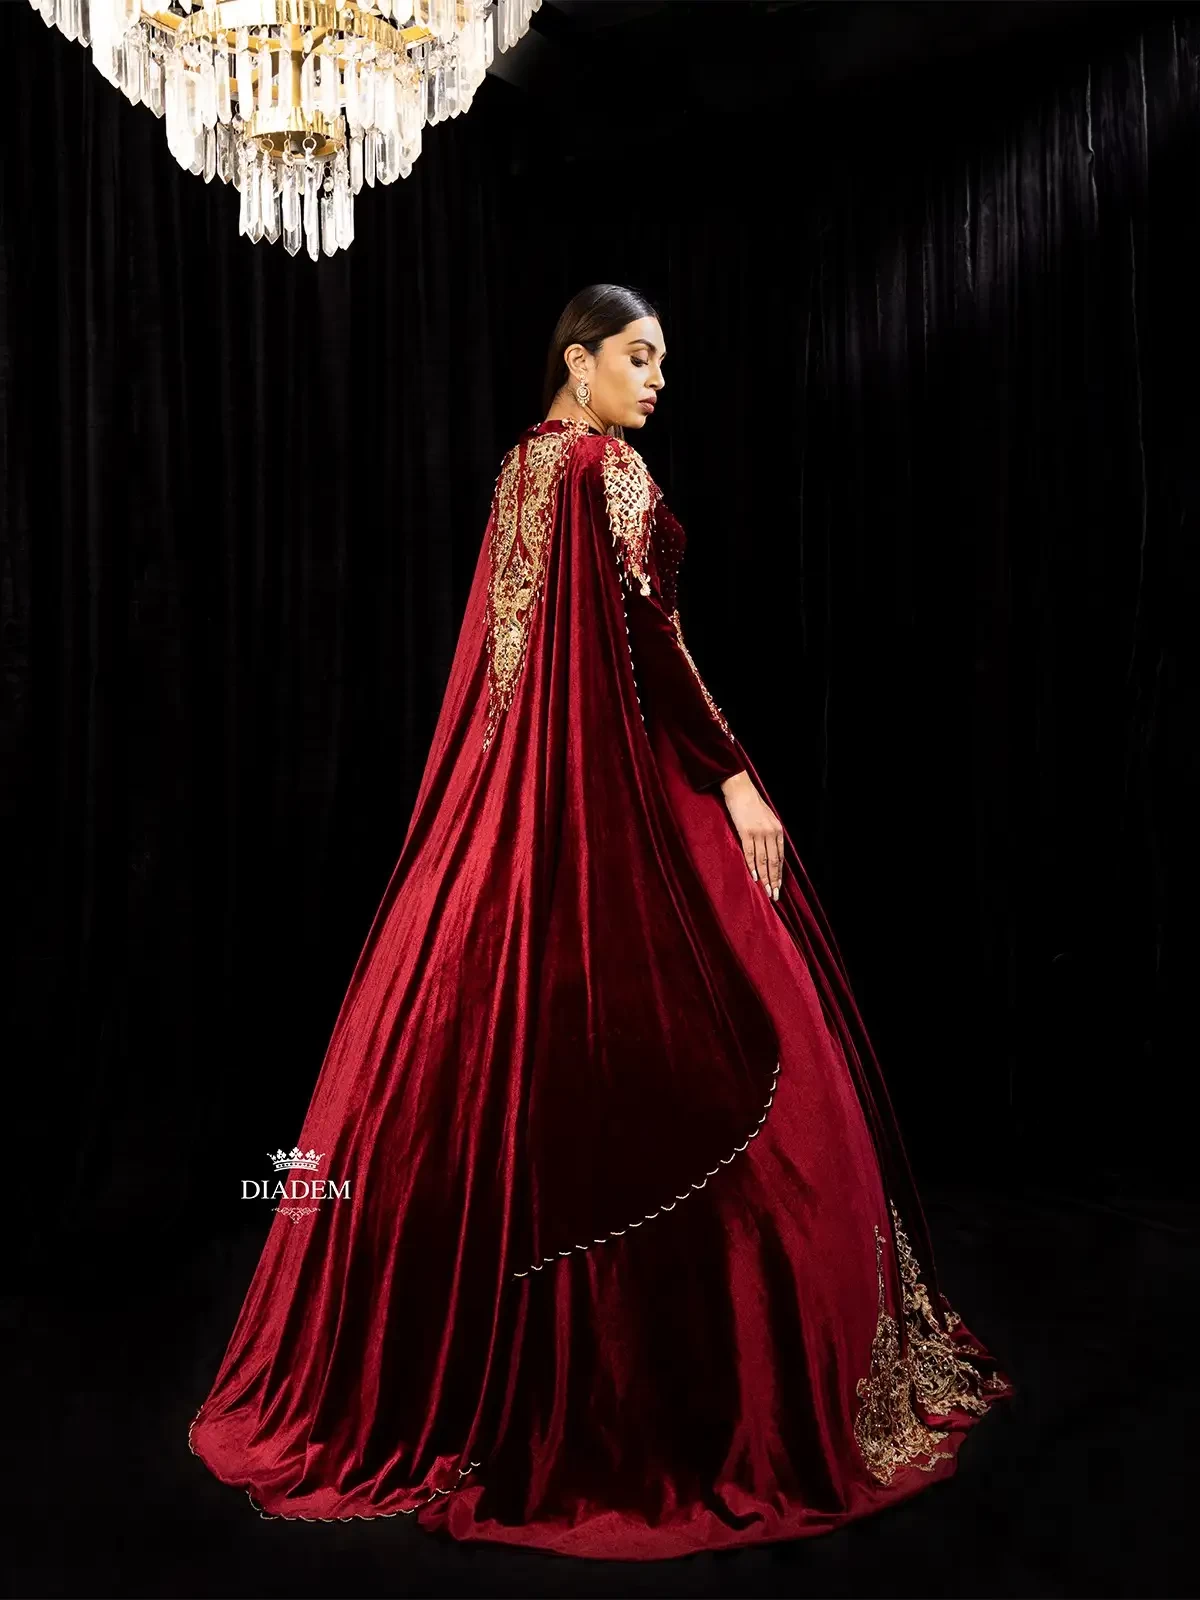 Dark Red Velvet Ball Gown Embellished With Laces And Crystal Beads